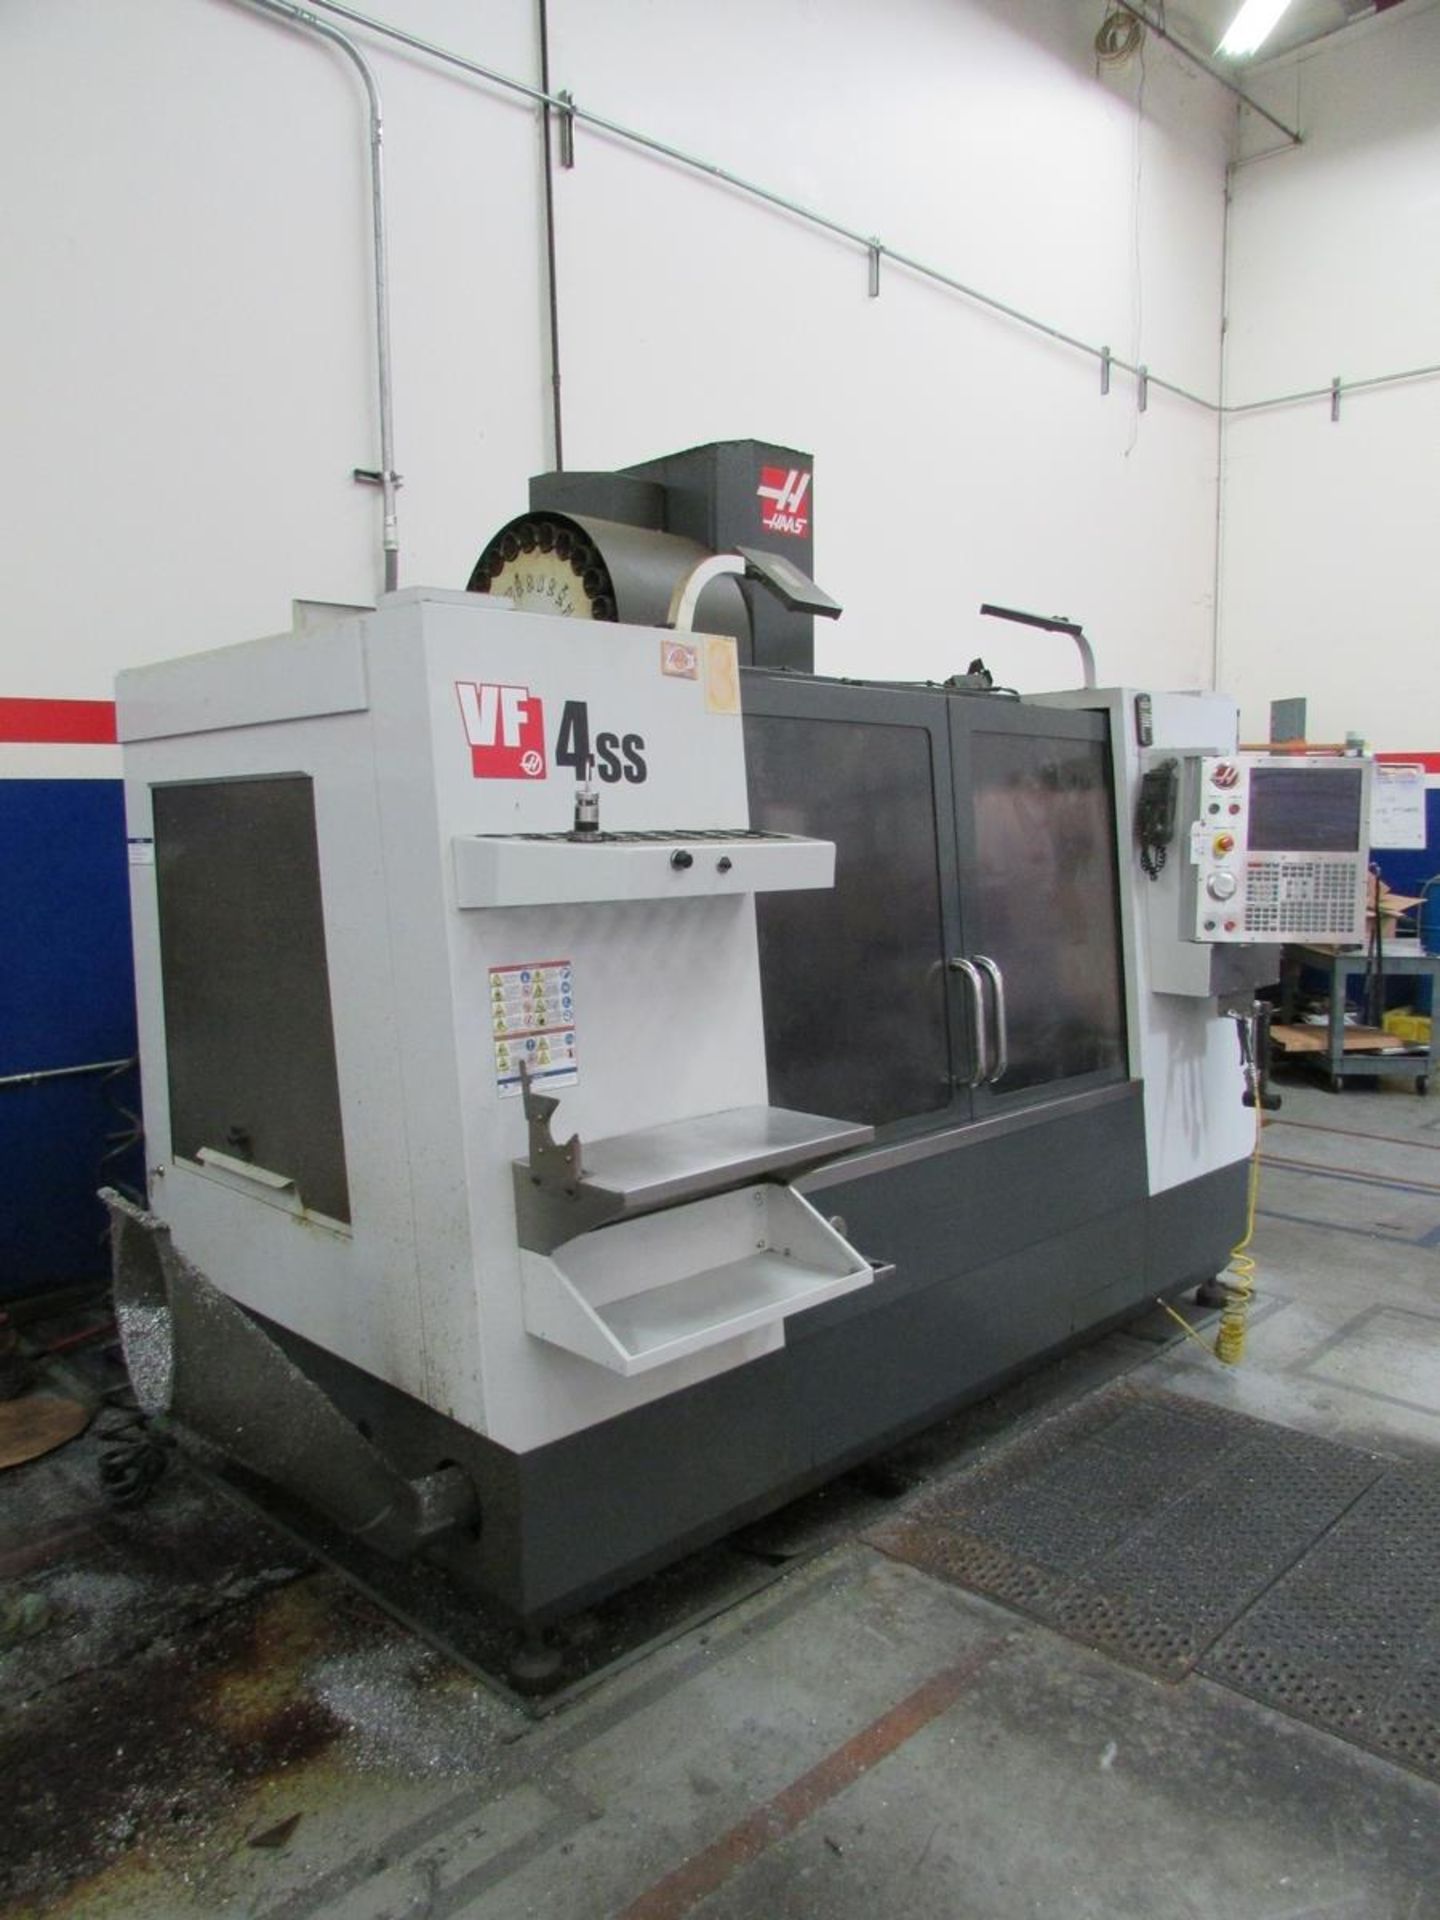 Haas VF4SS Vertical CNC Machining Center (2012) - Image 2 of 51